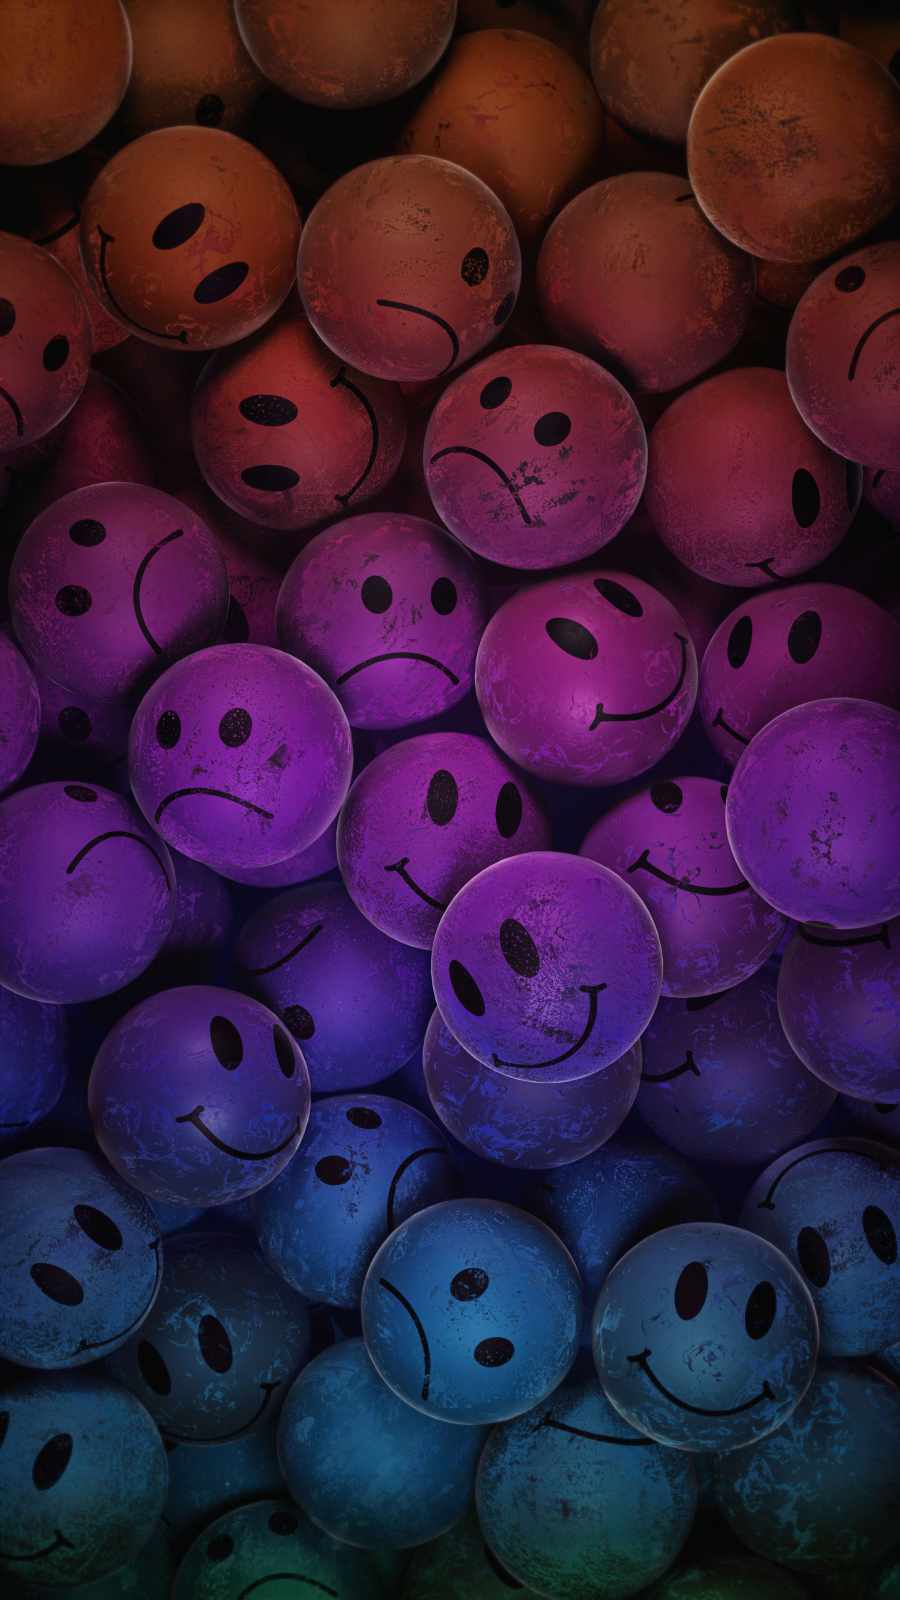 A group of colorful smiley faces on the ground - Sad, happy